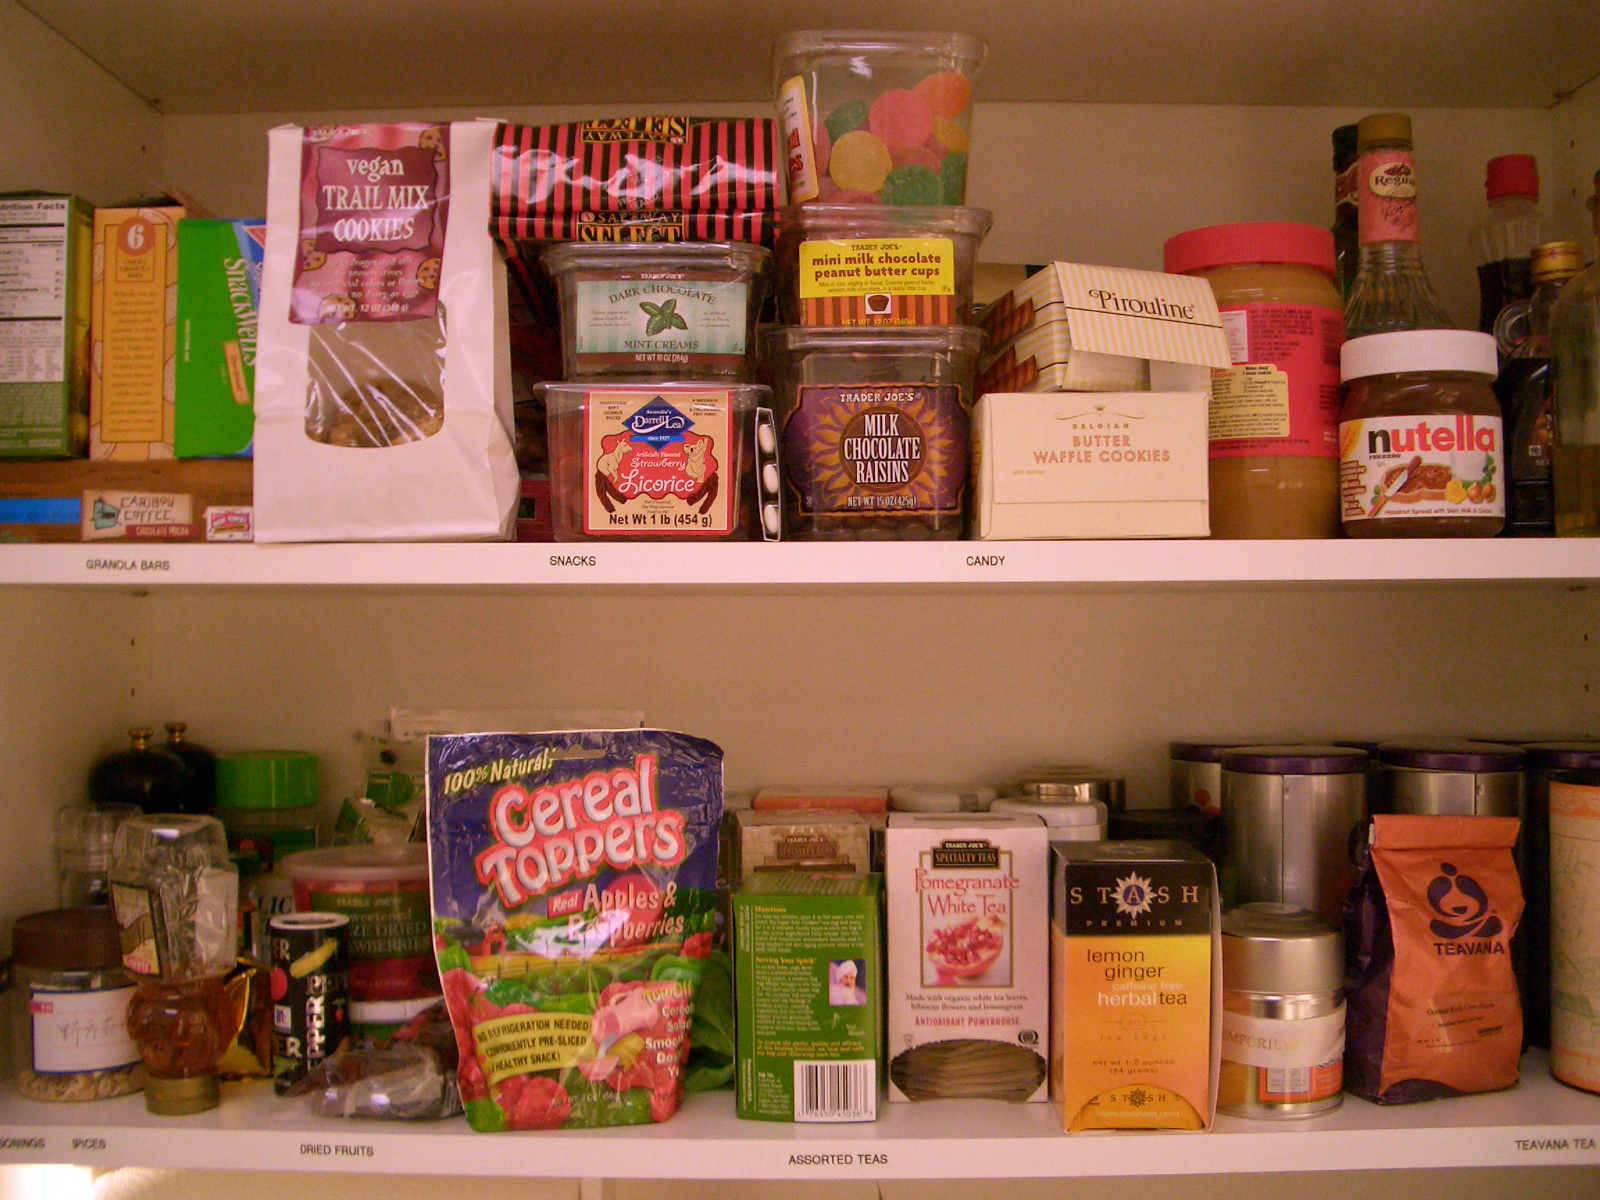 shelves displaying several types of food in containers